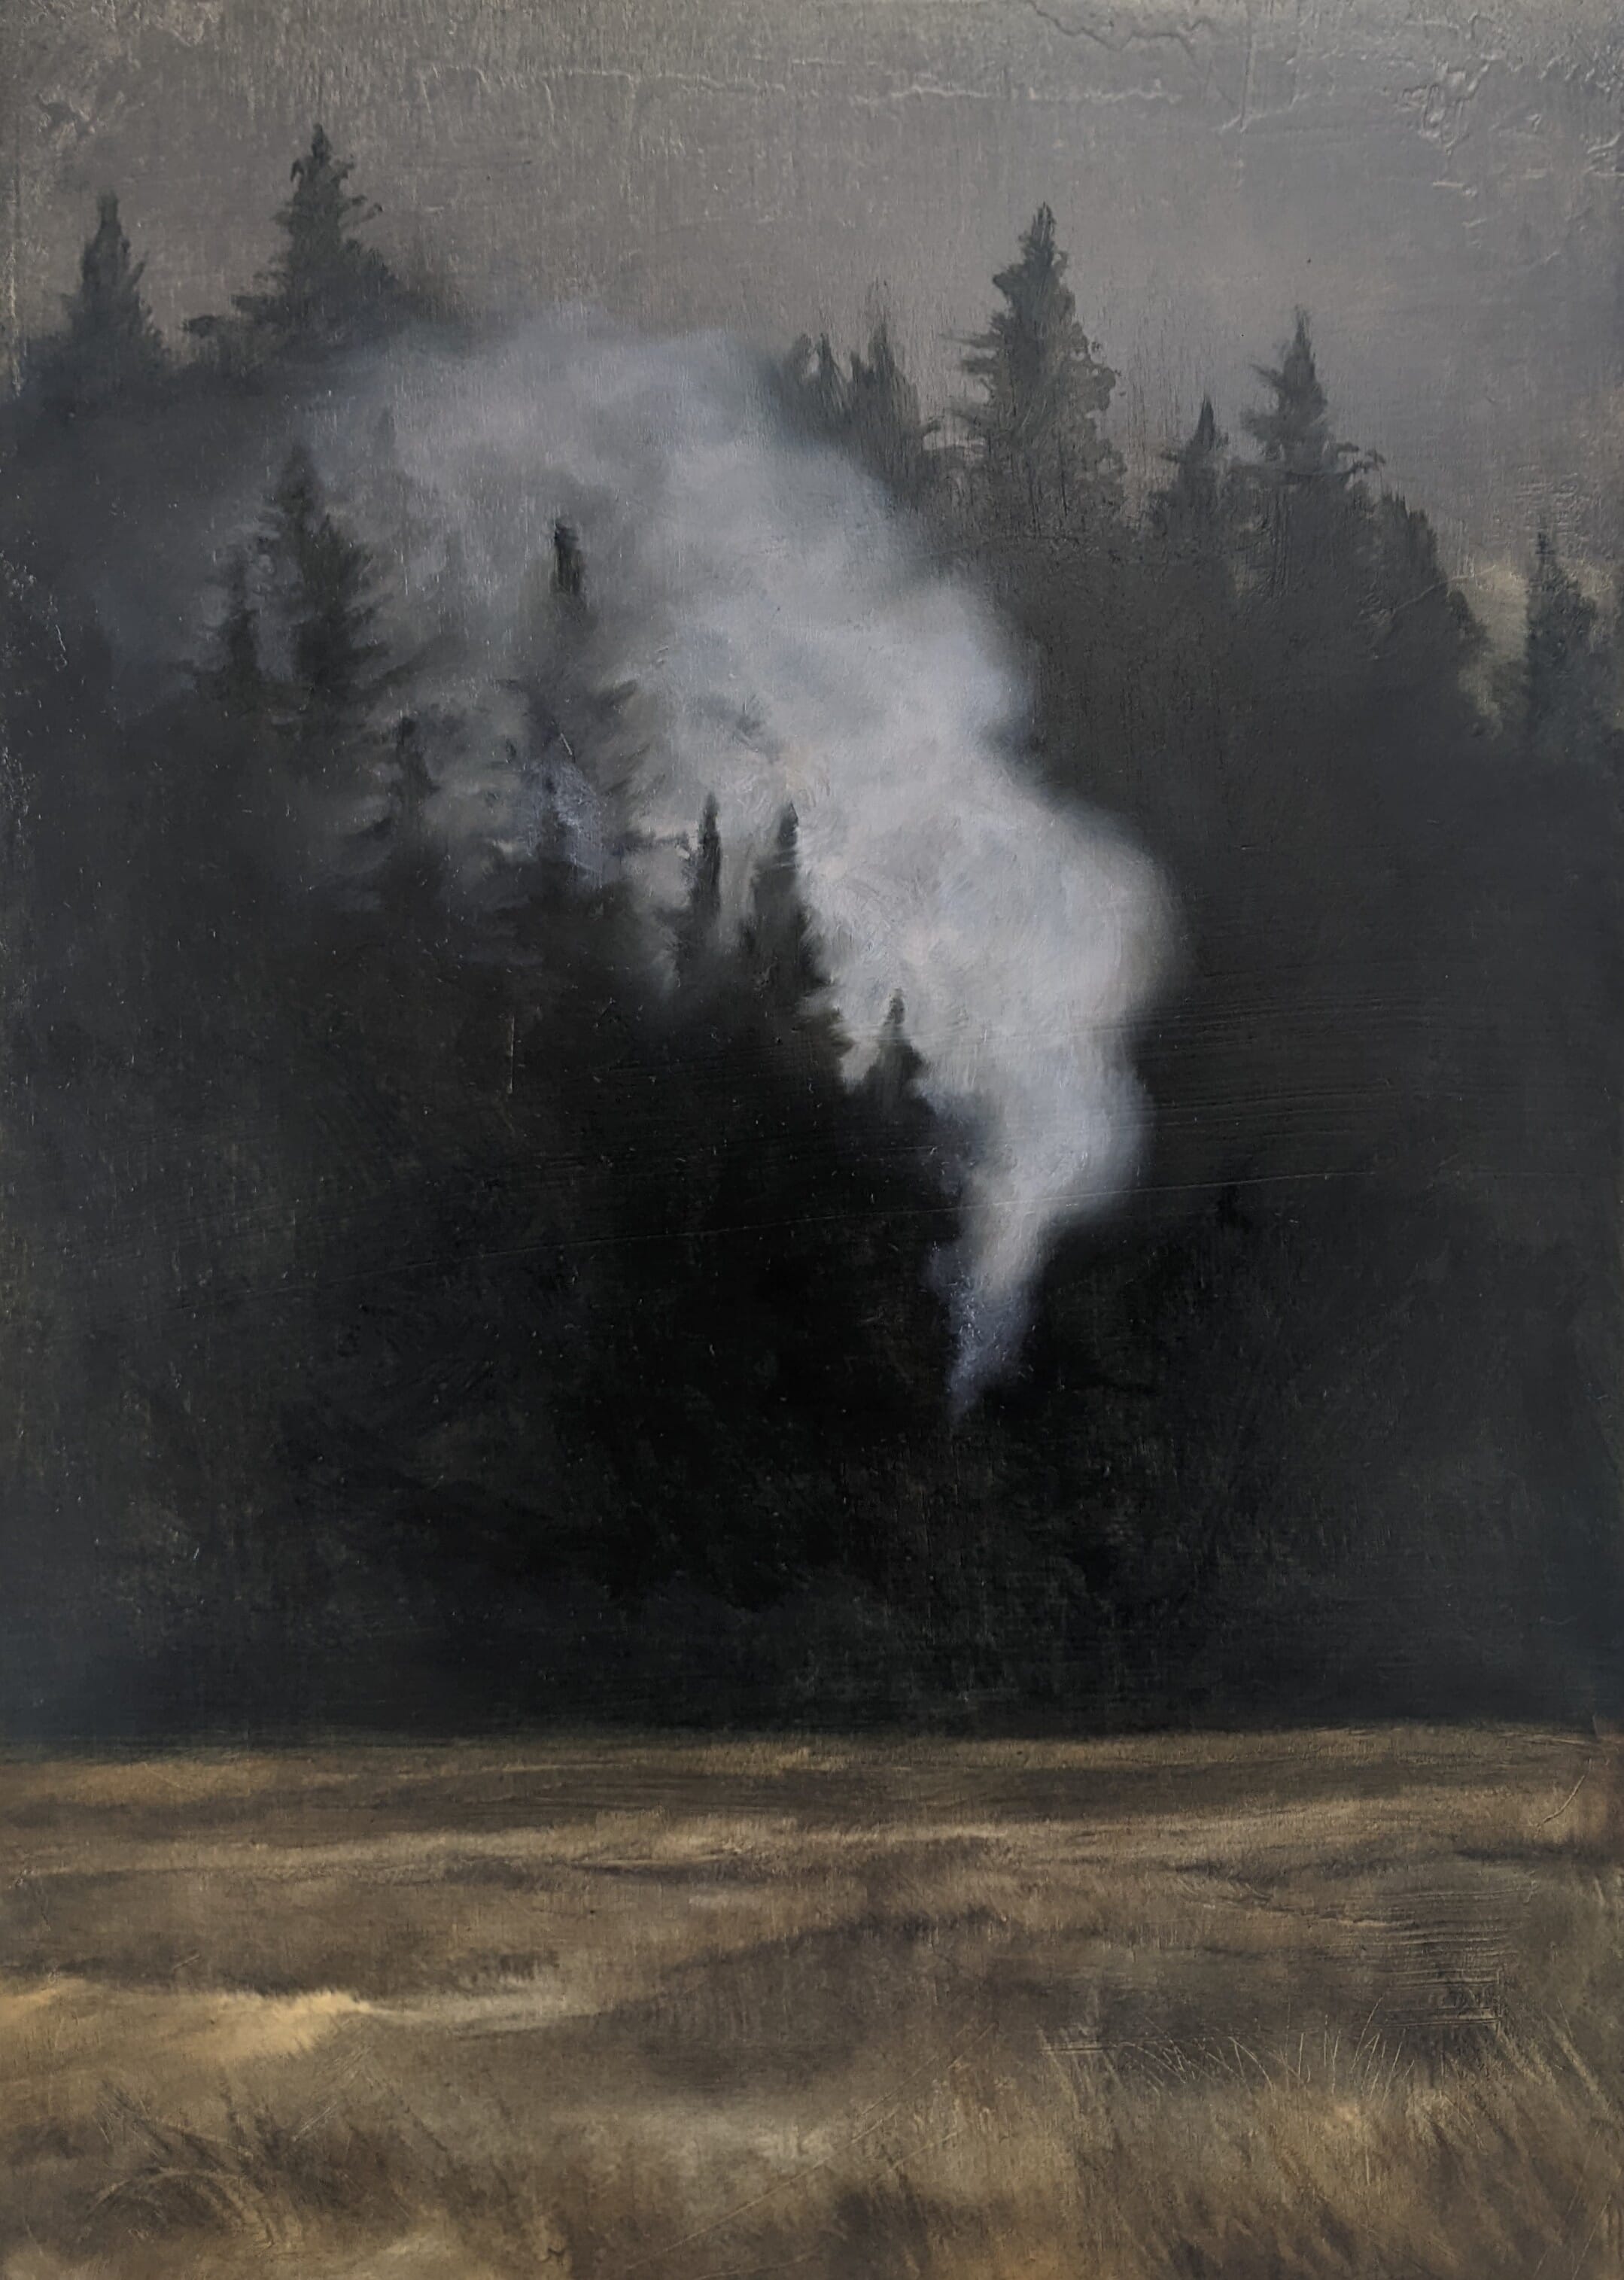  A View of The Forest at Dusk, With Rising Smoke